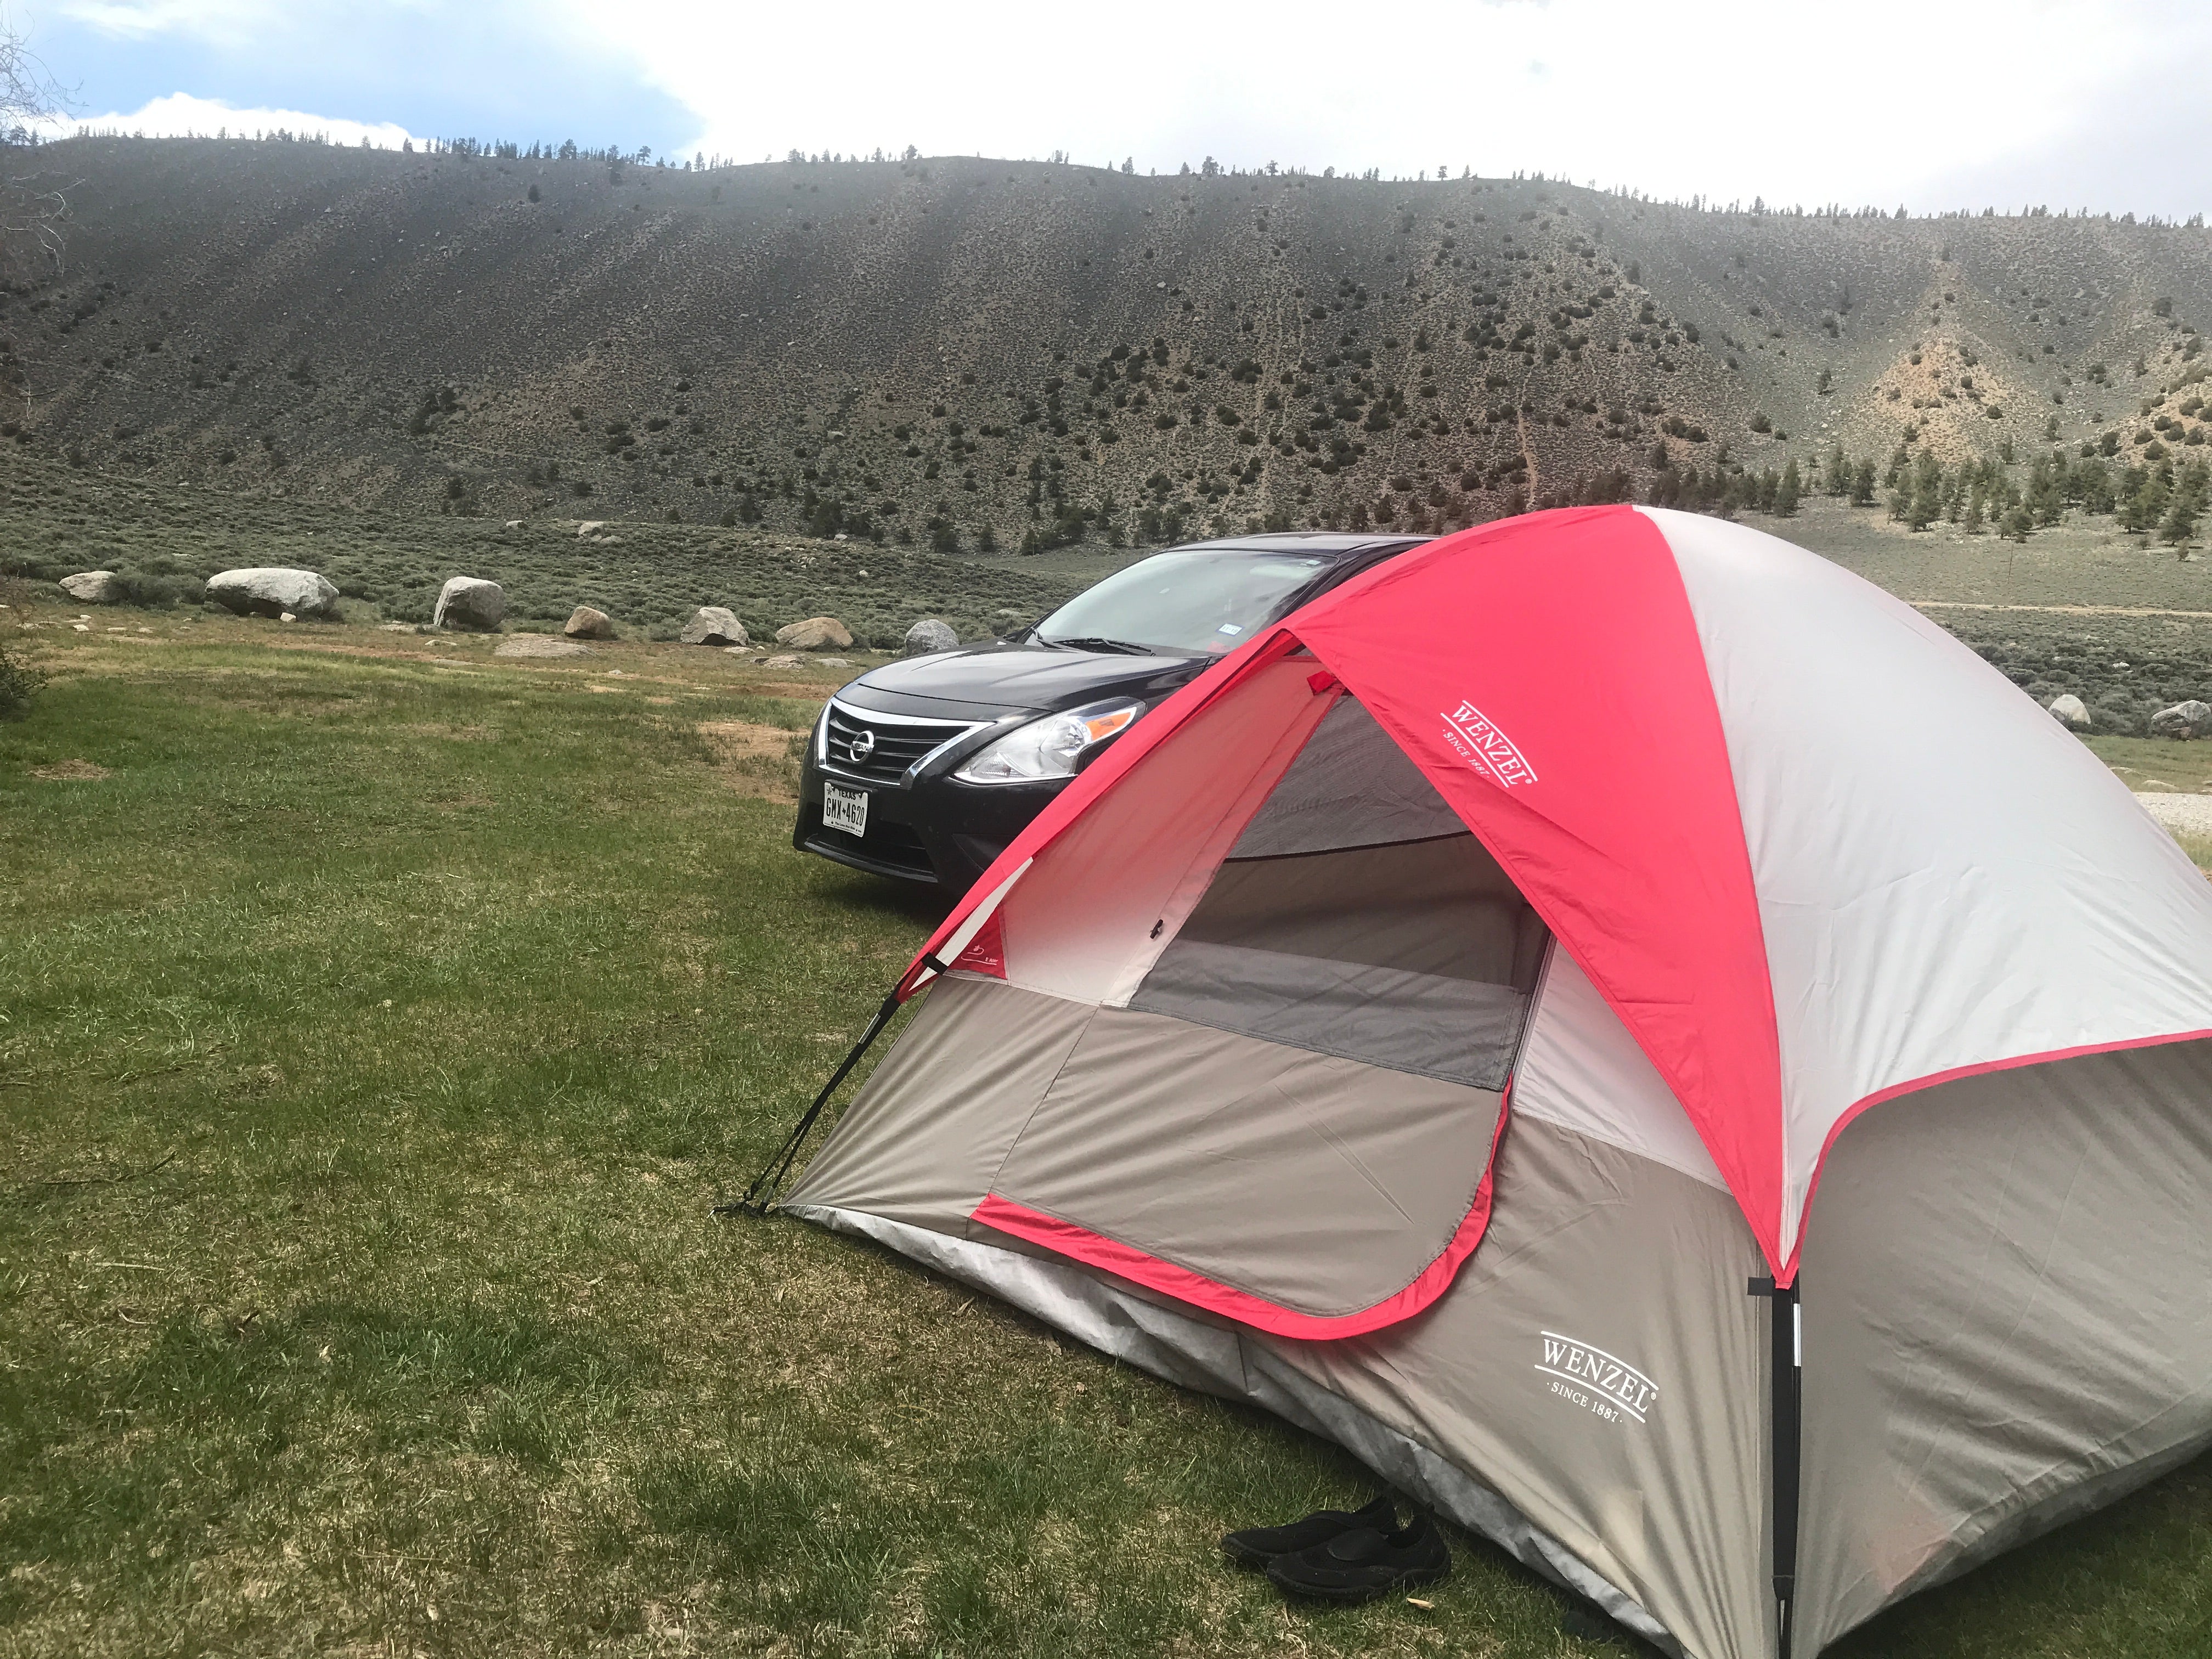 Camper submitted image from Clear Creek Reservoir - 5